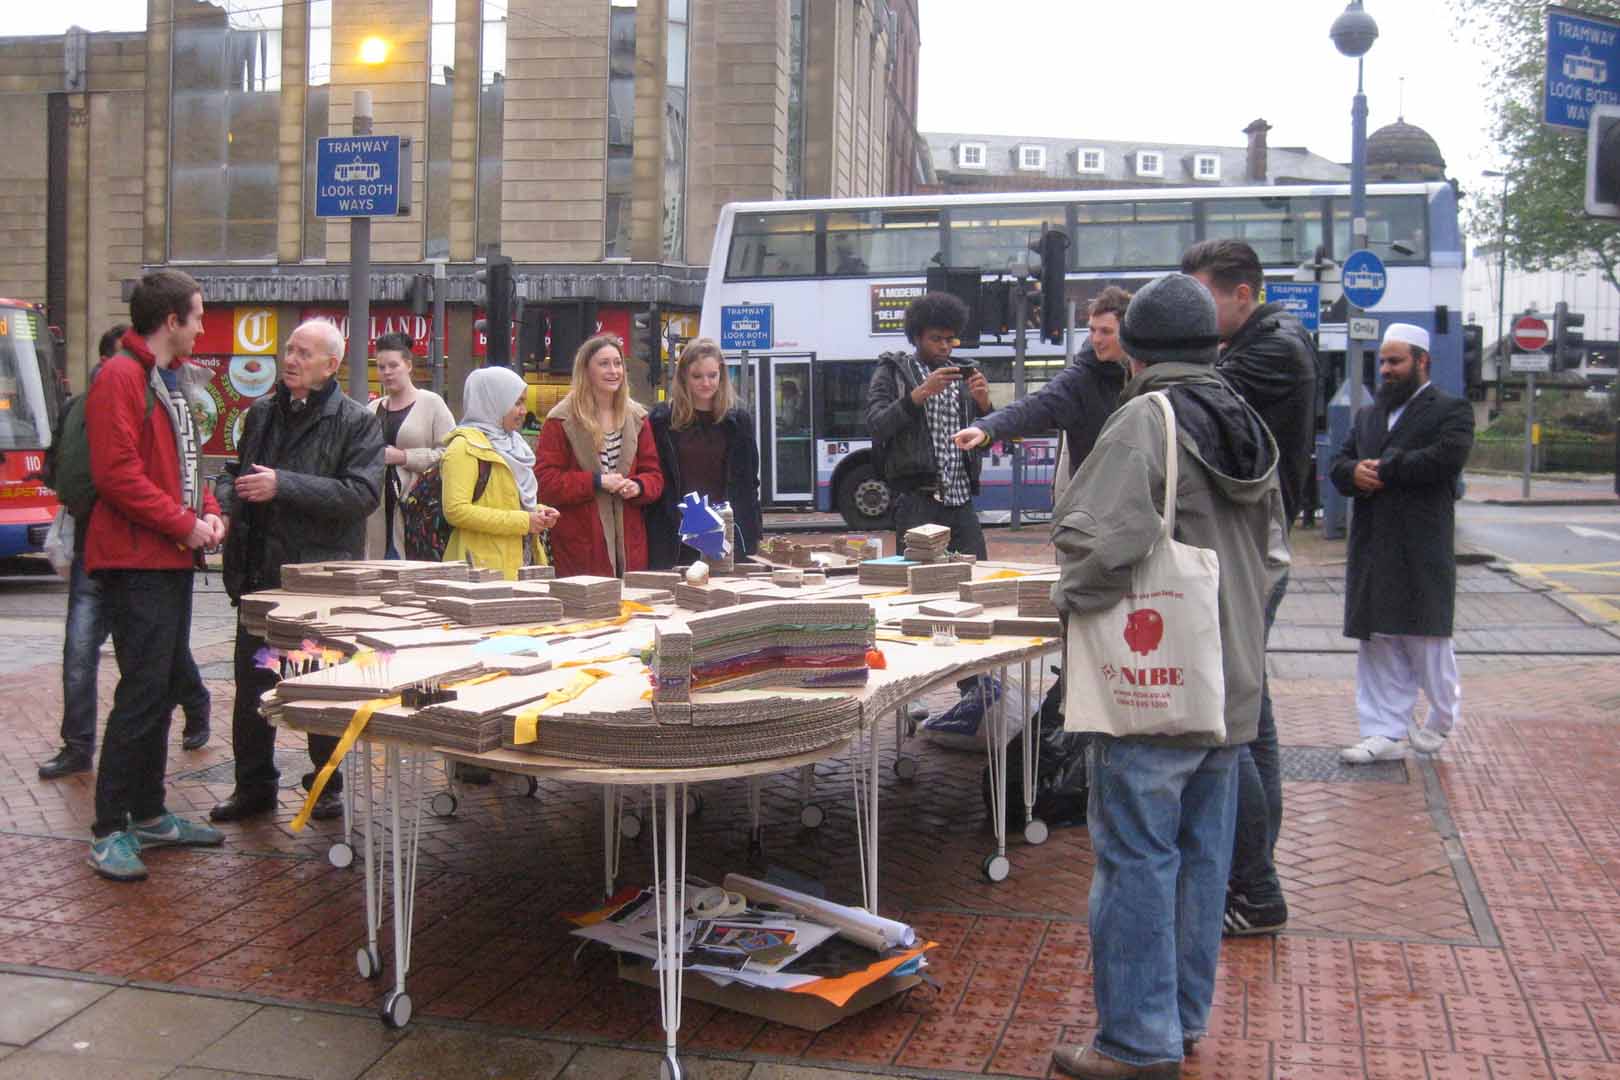 People gathered around a table outside